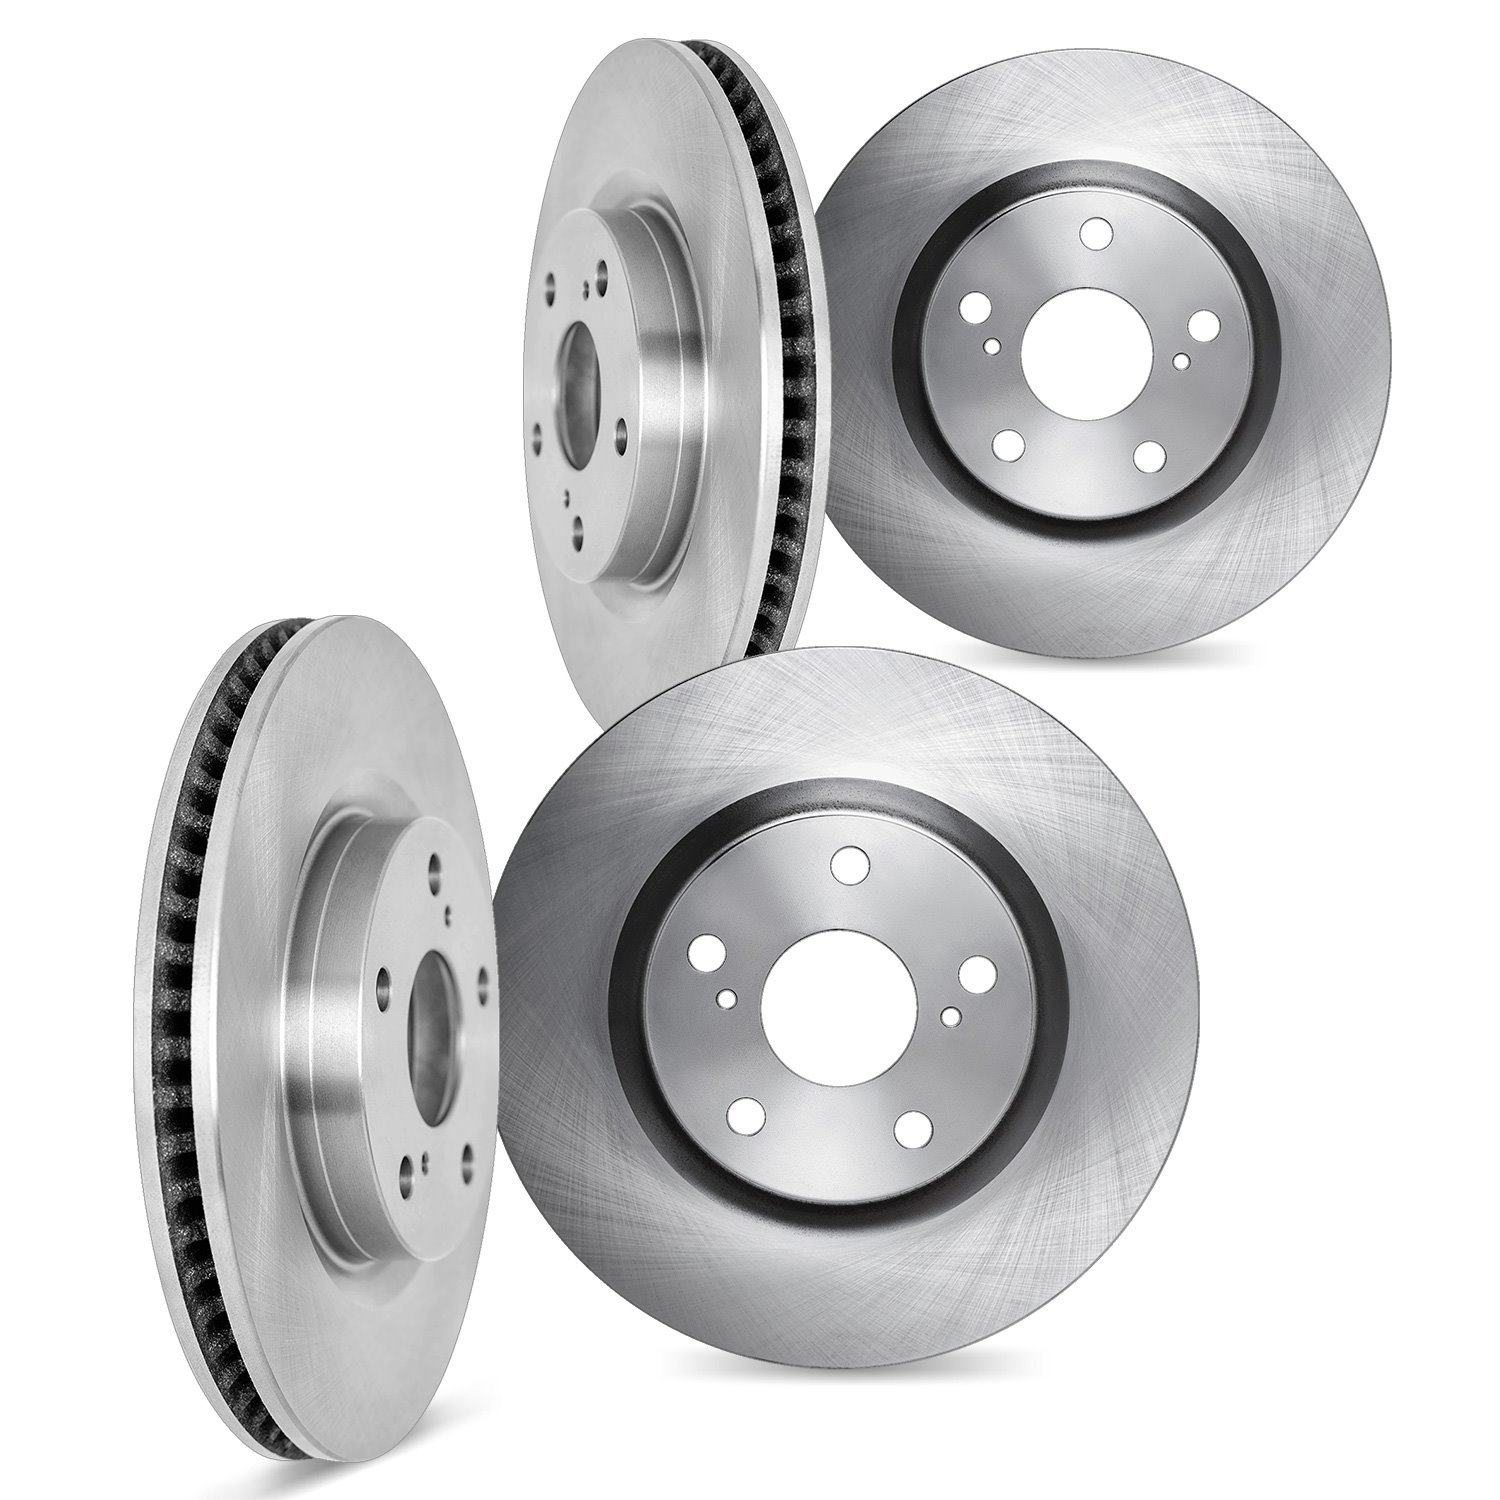 6004-13048 Brake Rotors, Fits Select Multiple Makes/Models, Position: Front and Rear